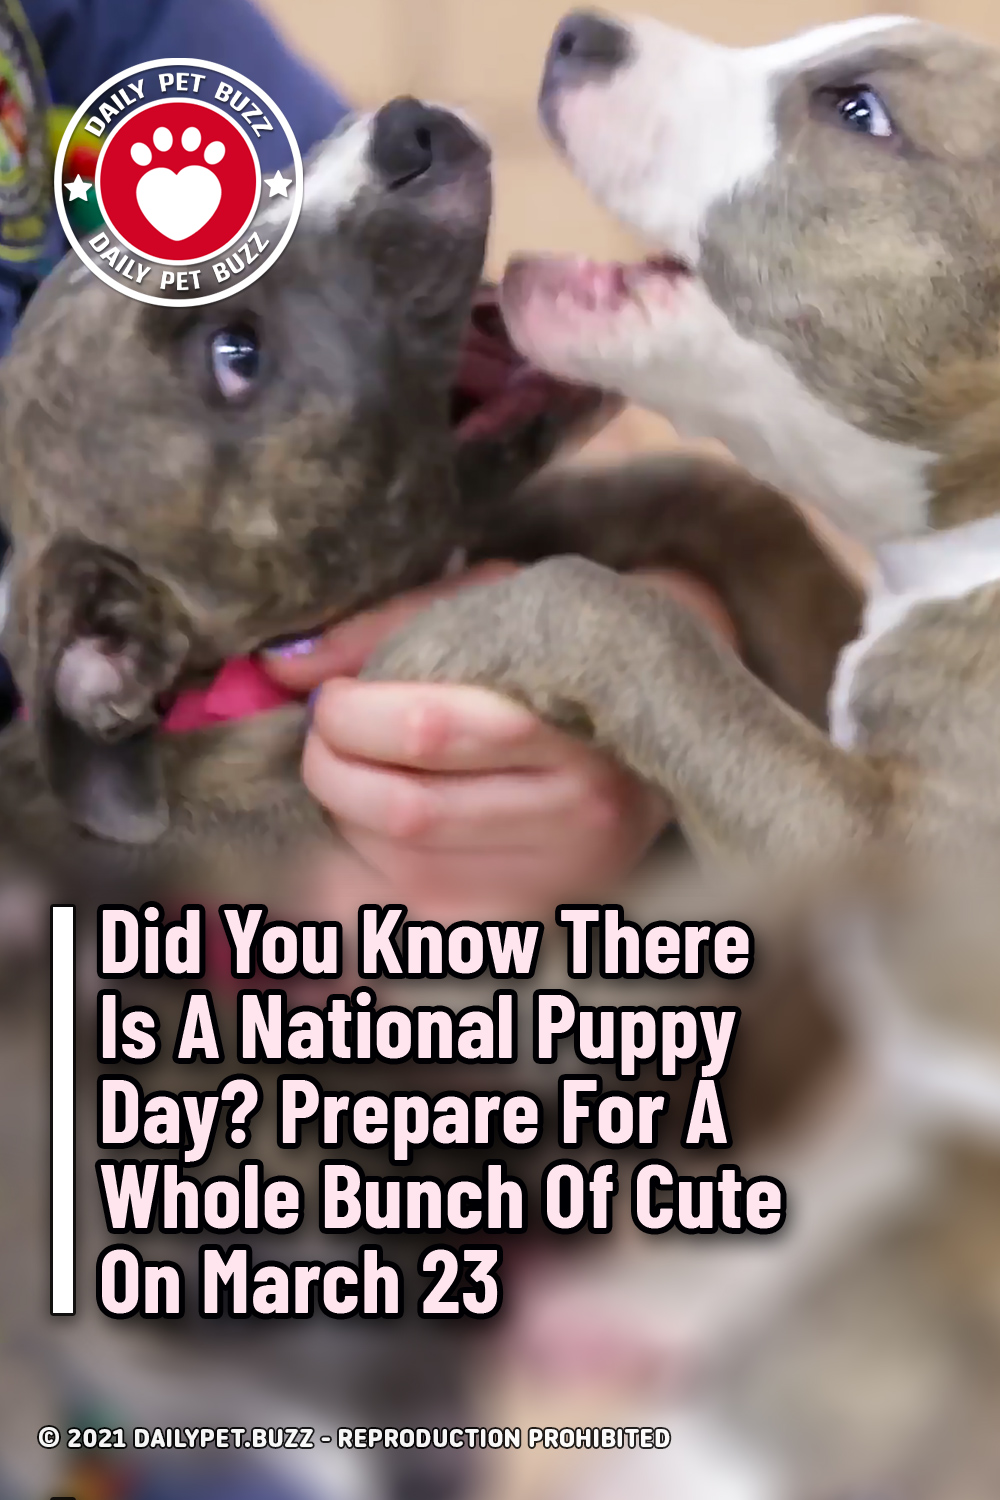 Did You Know There Is A National Puppy Day? Prepare For A Whole Bunch Of Cute On March 23